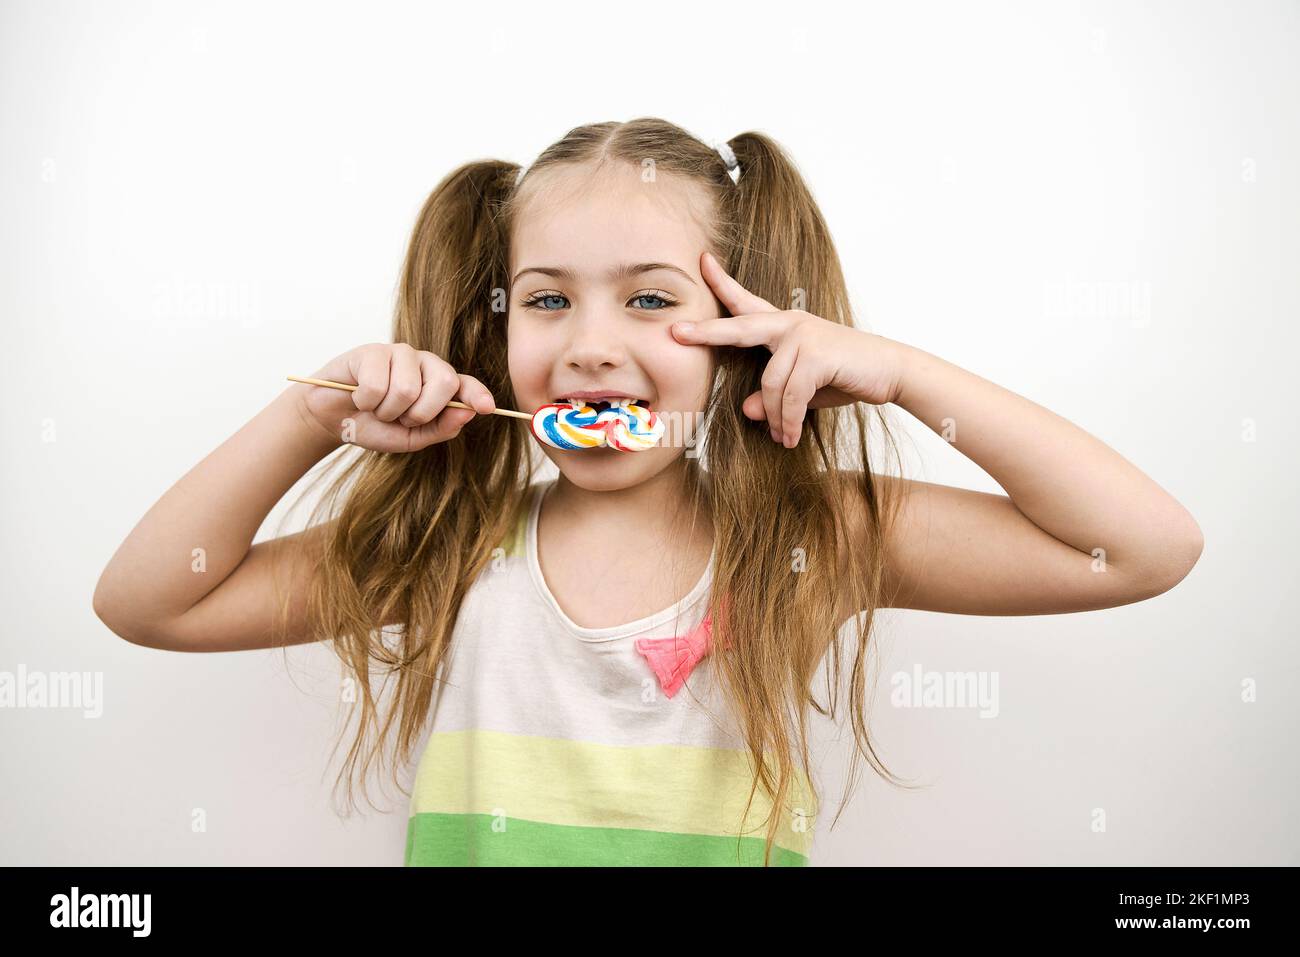 Cute toothless little girl with blue eyes eating lollipop. isolated on white Stock Photo